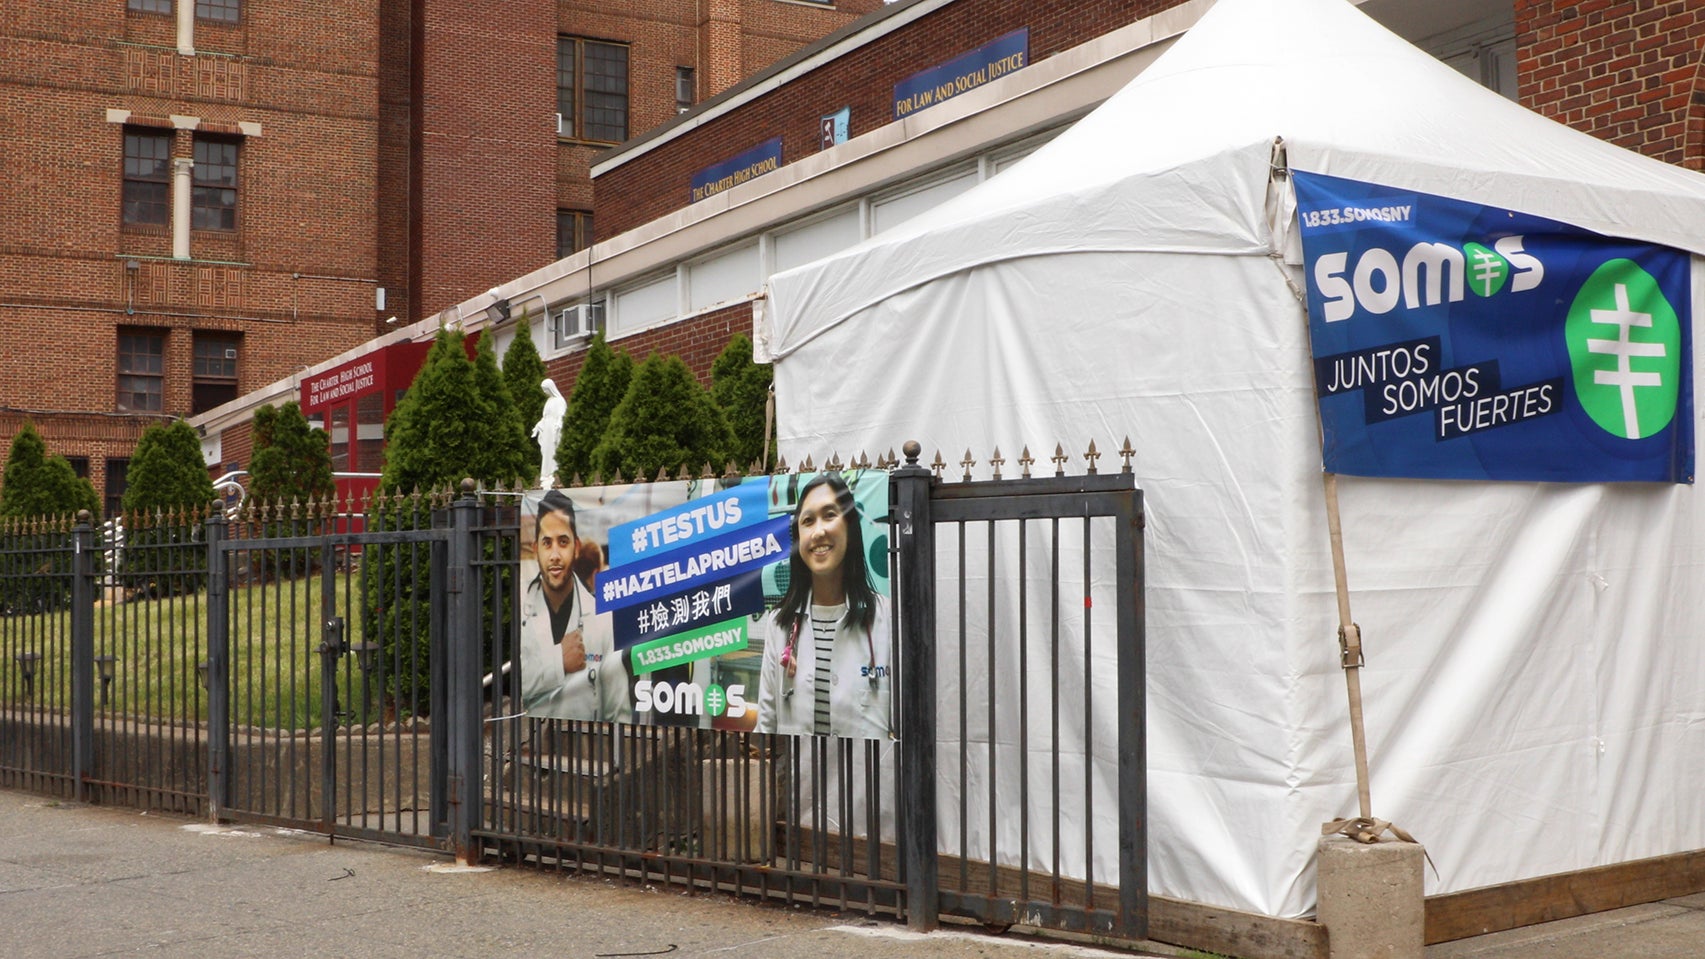 N.Y. Archdiocese, partner offer COVID-19 tests in underserved